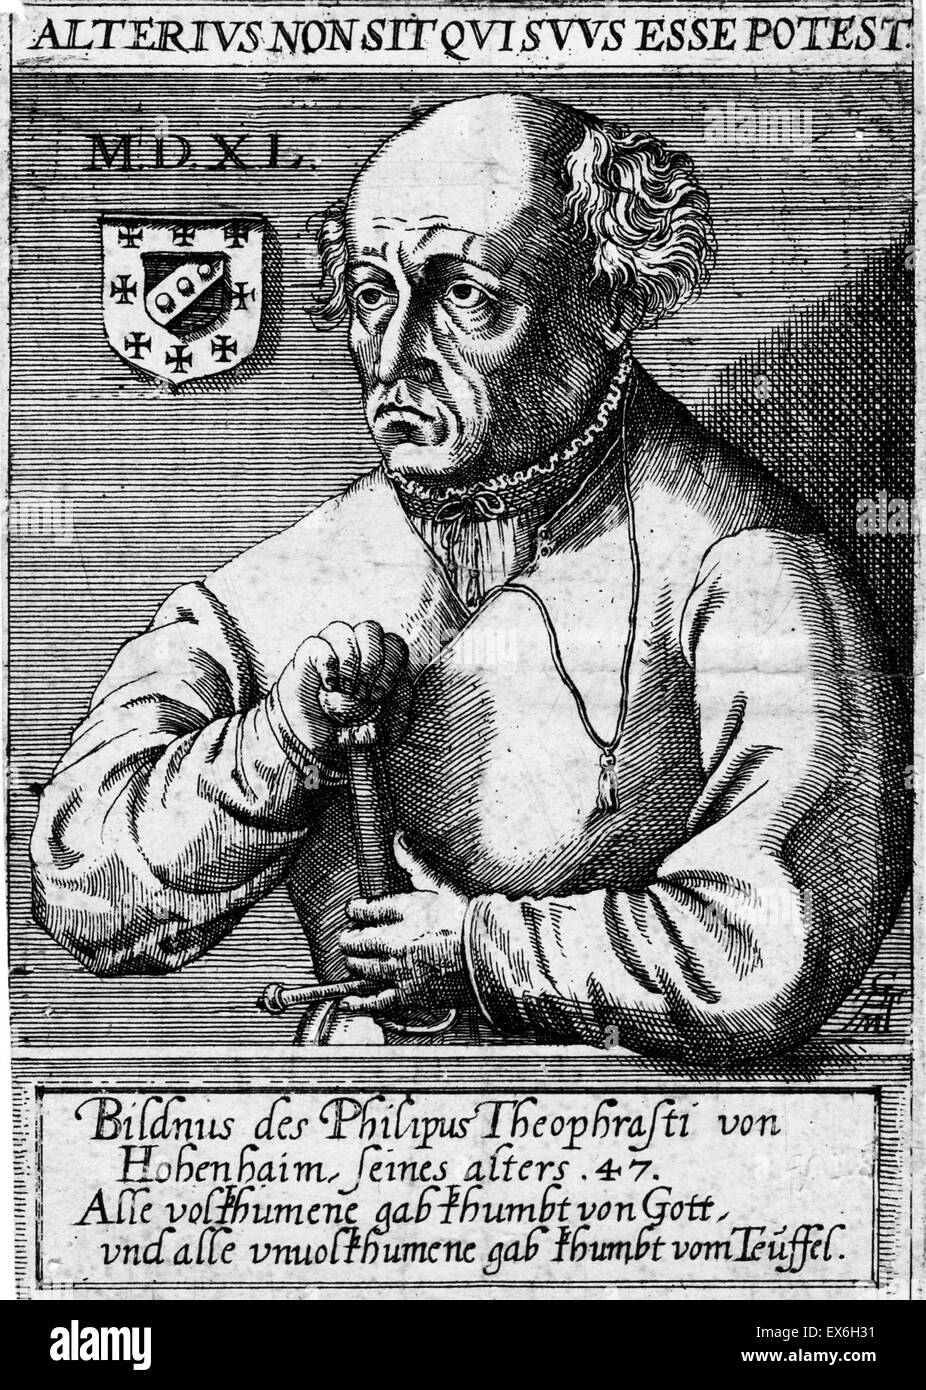 Portrait of Paracelsus (1493-1541) Swiss German Renaissance physician, botanist, alchemist, astrologer, and general occultist. He founded the discipline of toxicology. Half figure facing to the left. He is holding a sword in his hands. There is a shield i Stock Photo